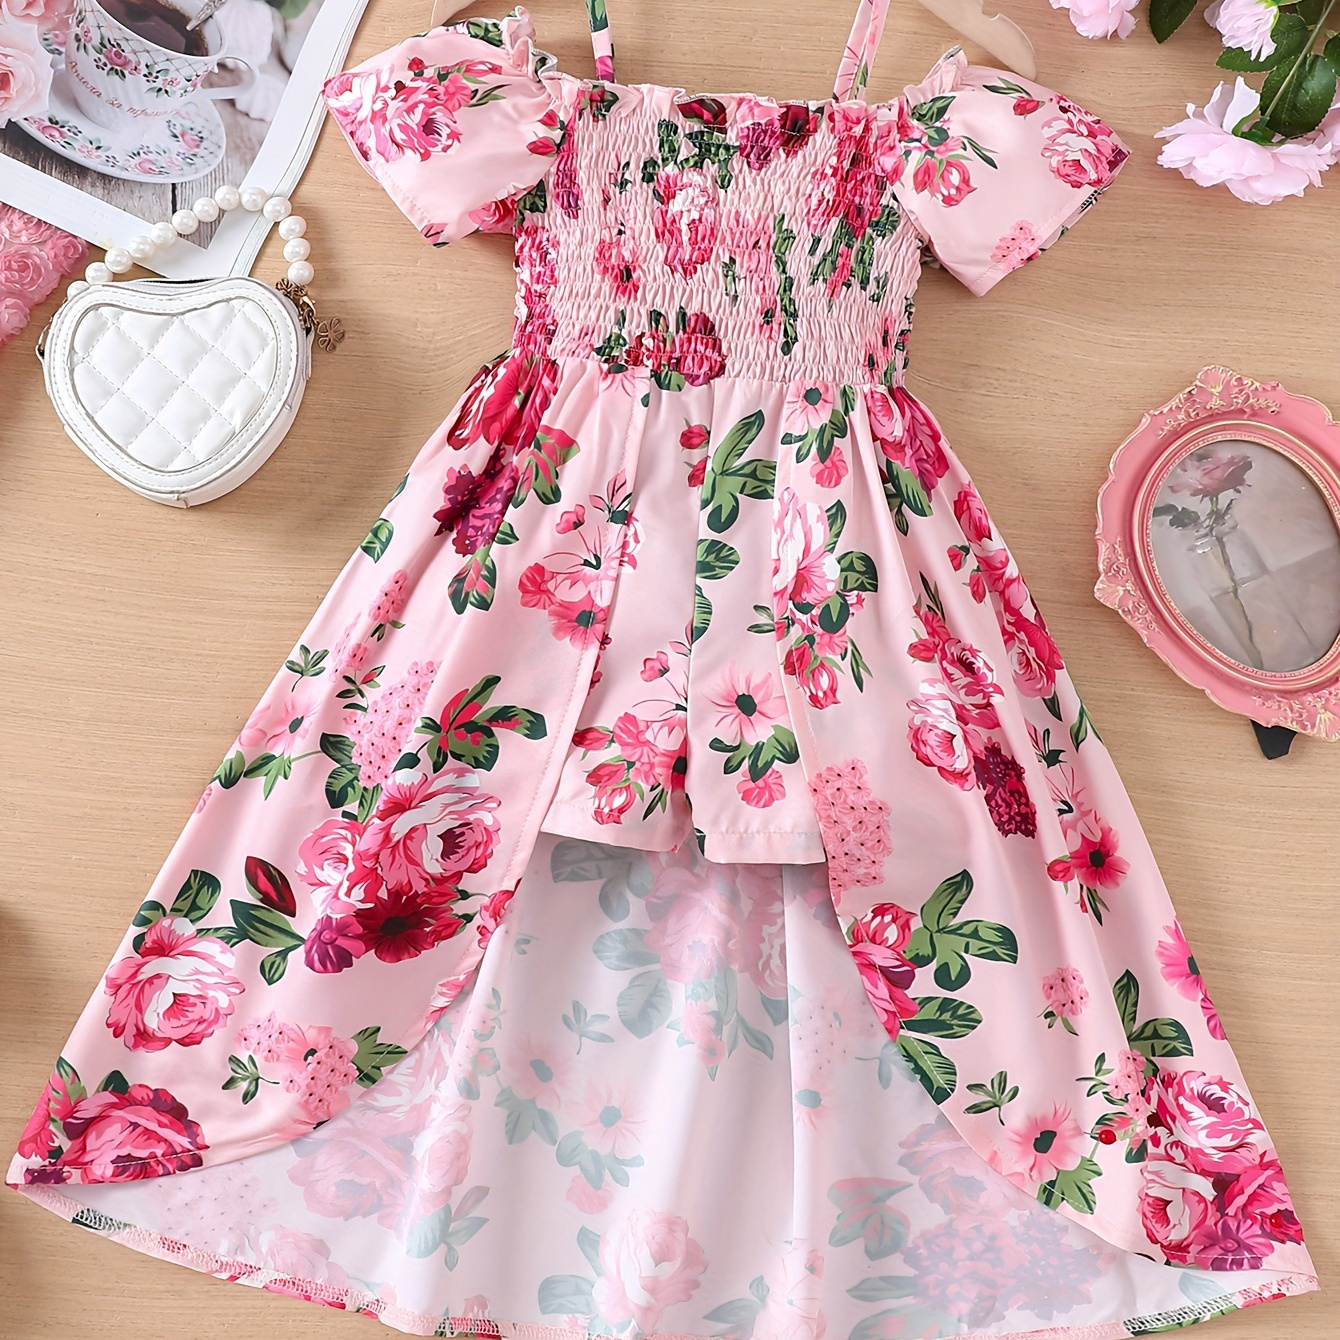 

Sweet Girls Flora Print Short Sleeve Jumpsuit Stylish Romper For Summer Party Beach Vacation Gift